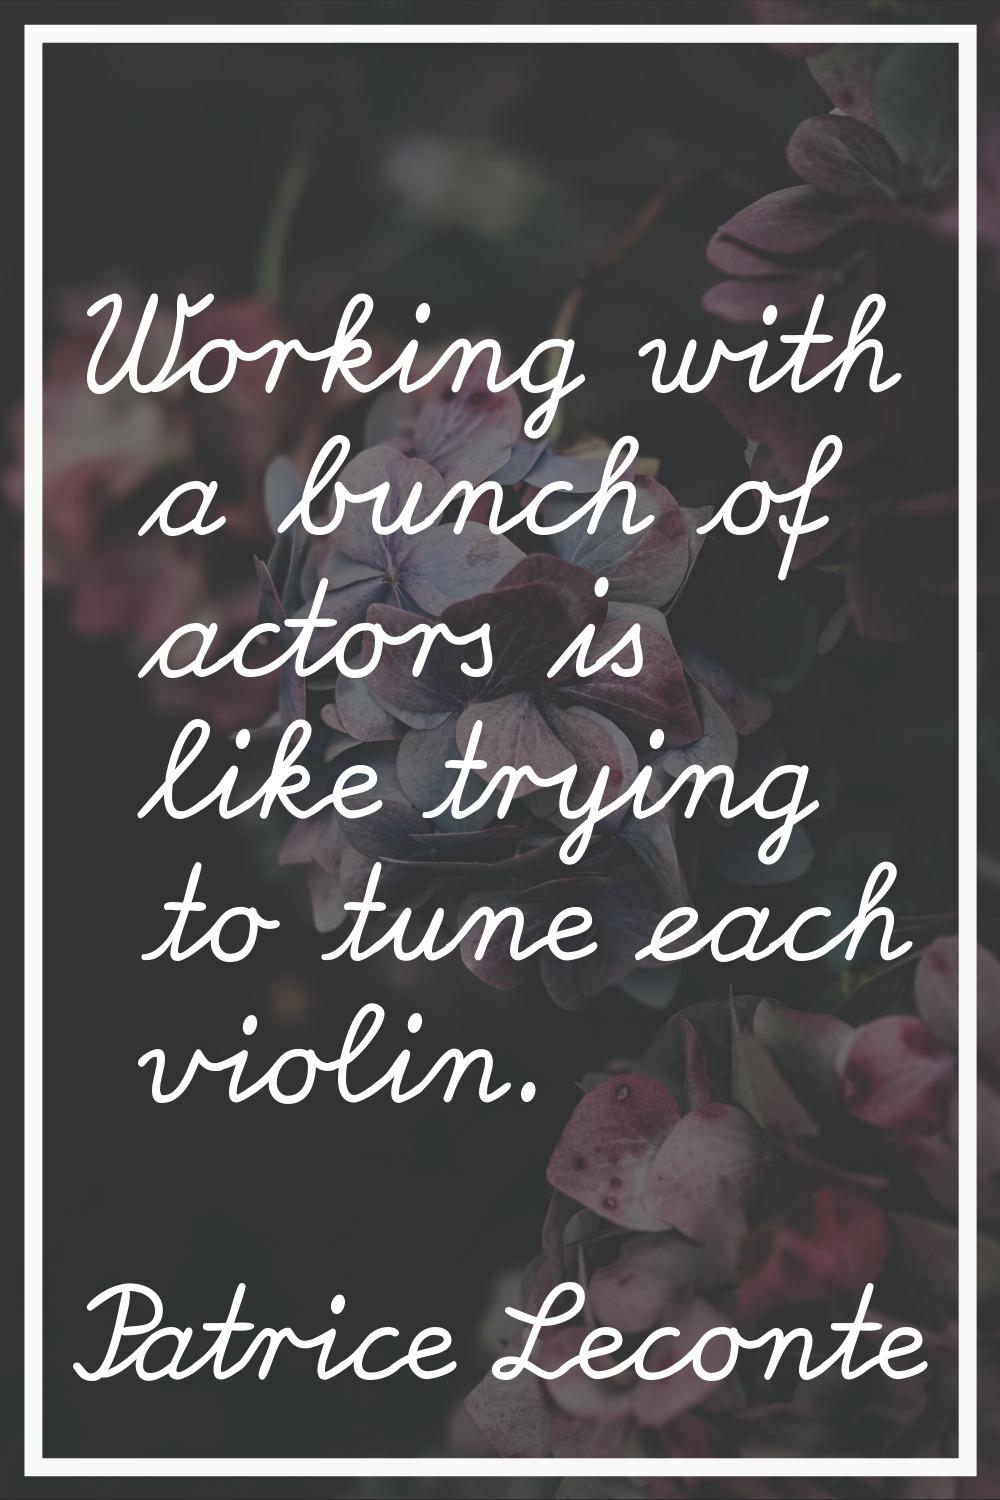 Working with a bunch of actors is like trying to tune each violin.